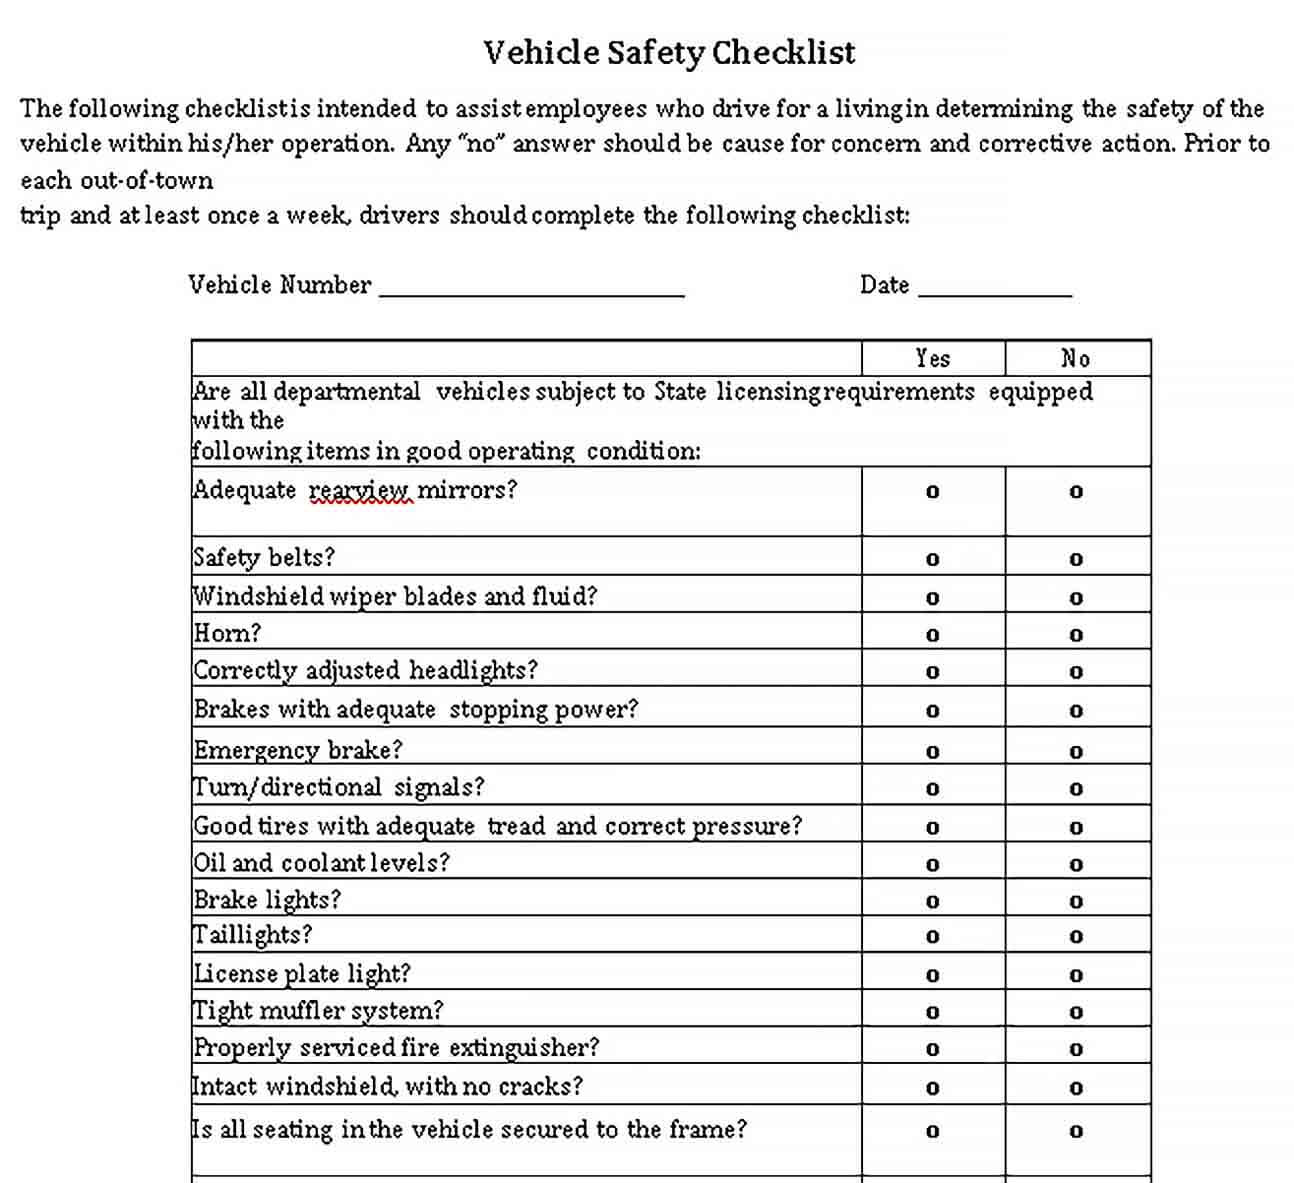 Sample Vehicle Safety Checklist Template